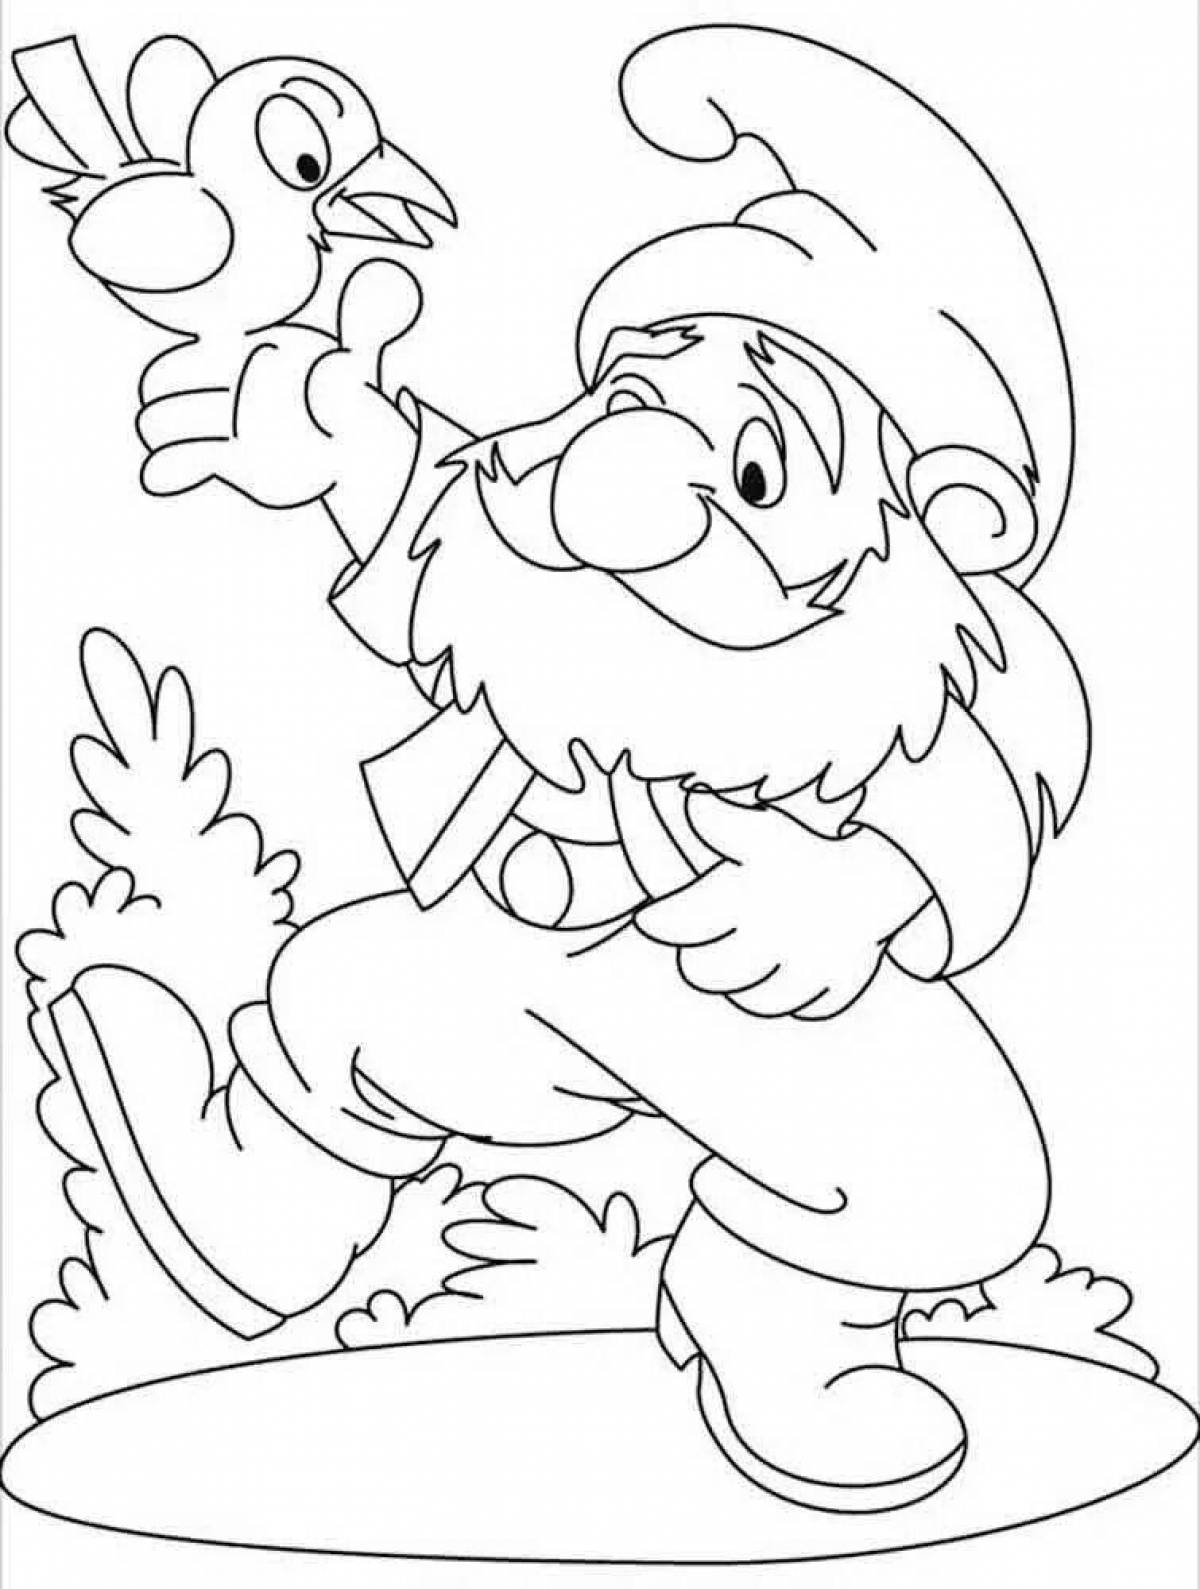 Colorful gnome coloring page